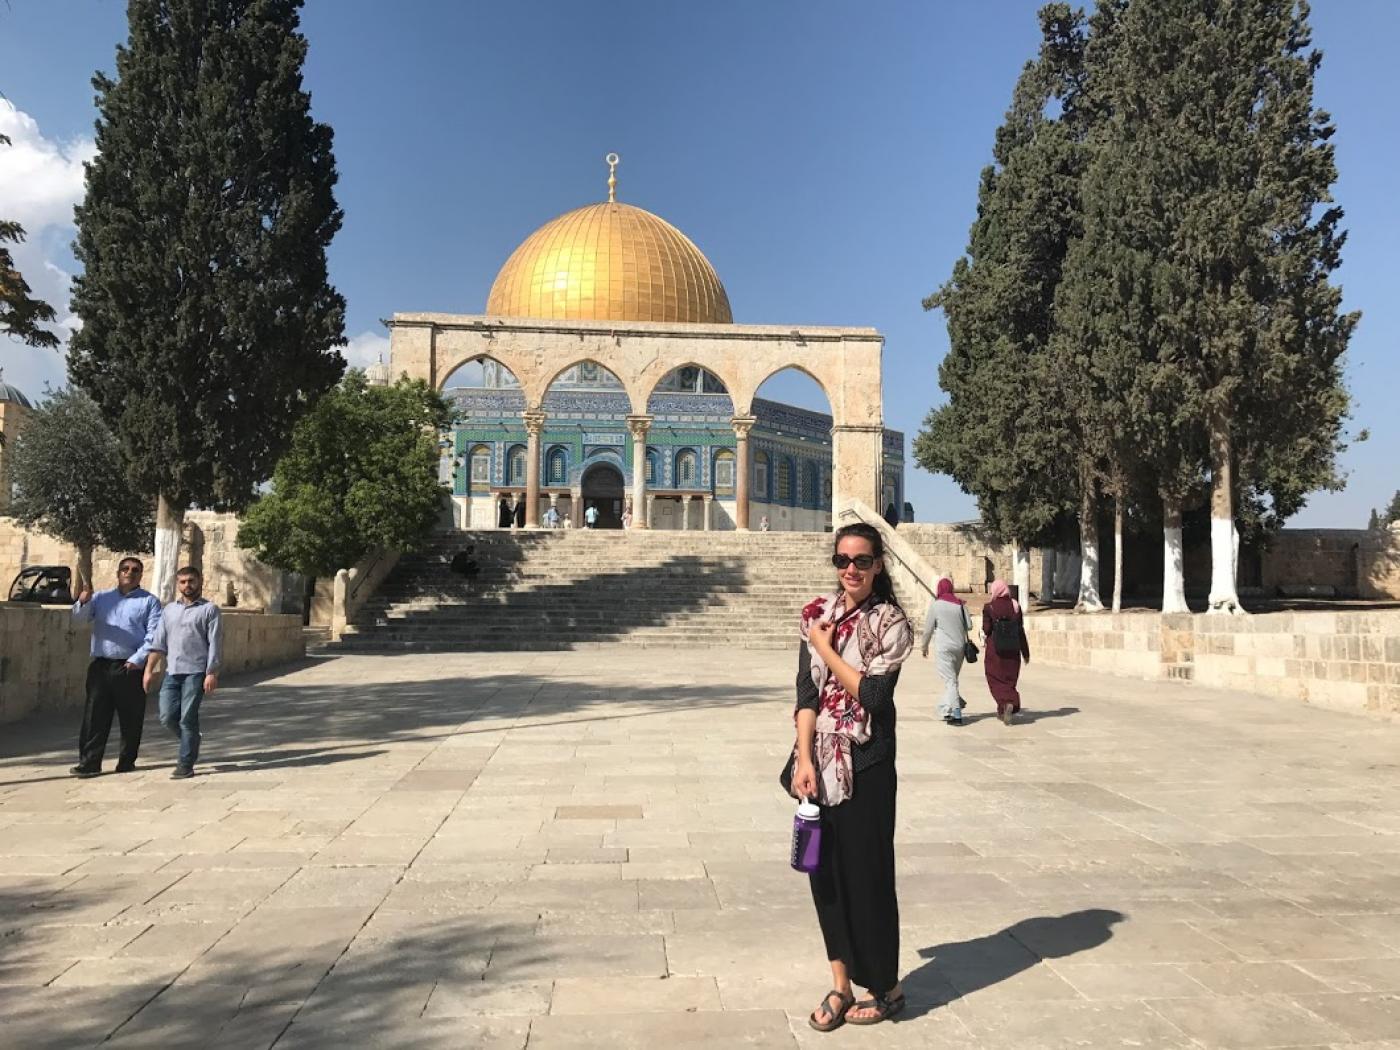 Madeline at the Dome of the Rock, also called Al Aqsa, in Israel. 